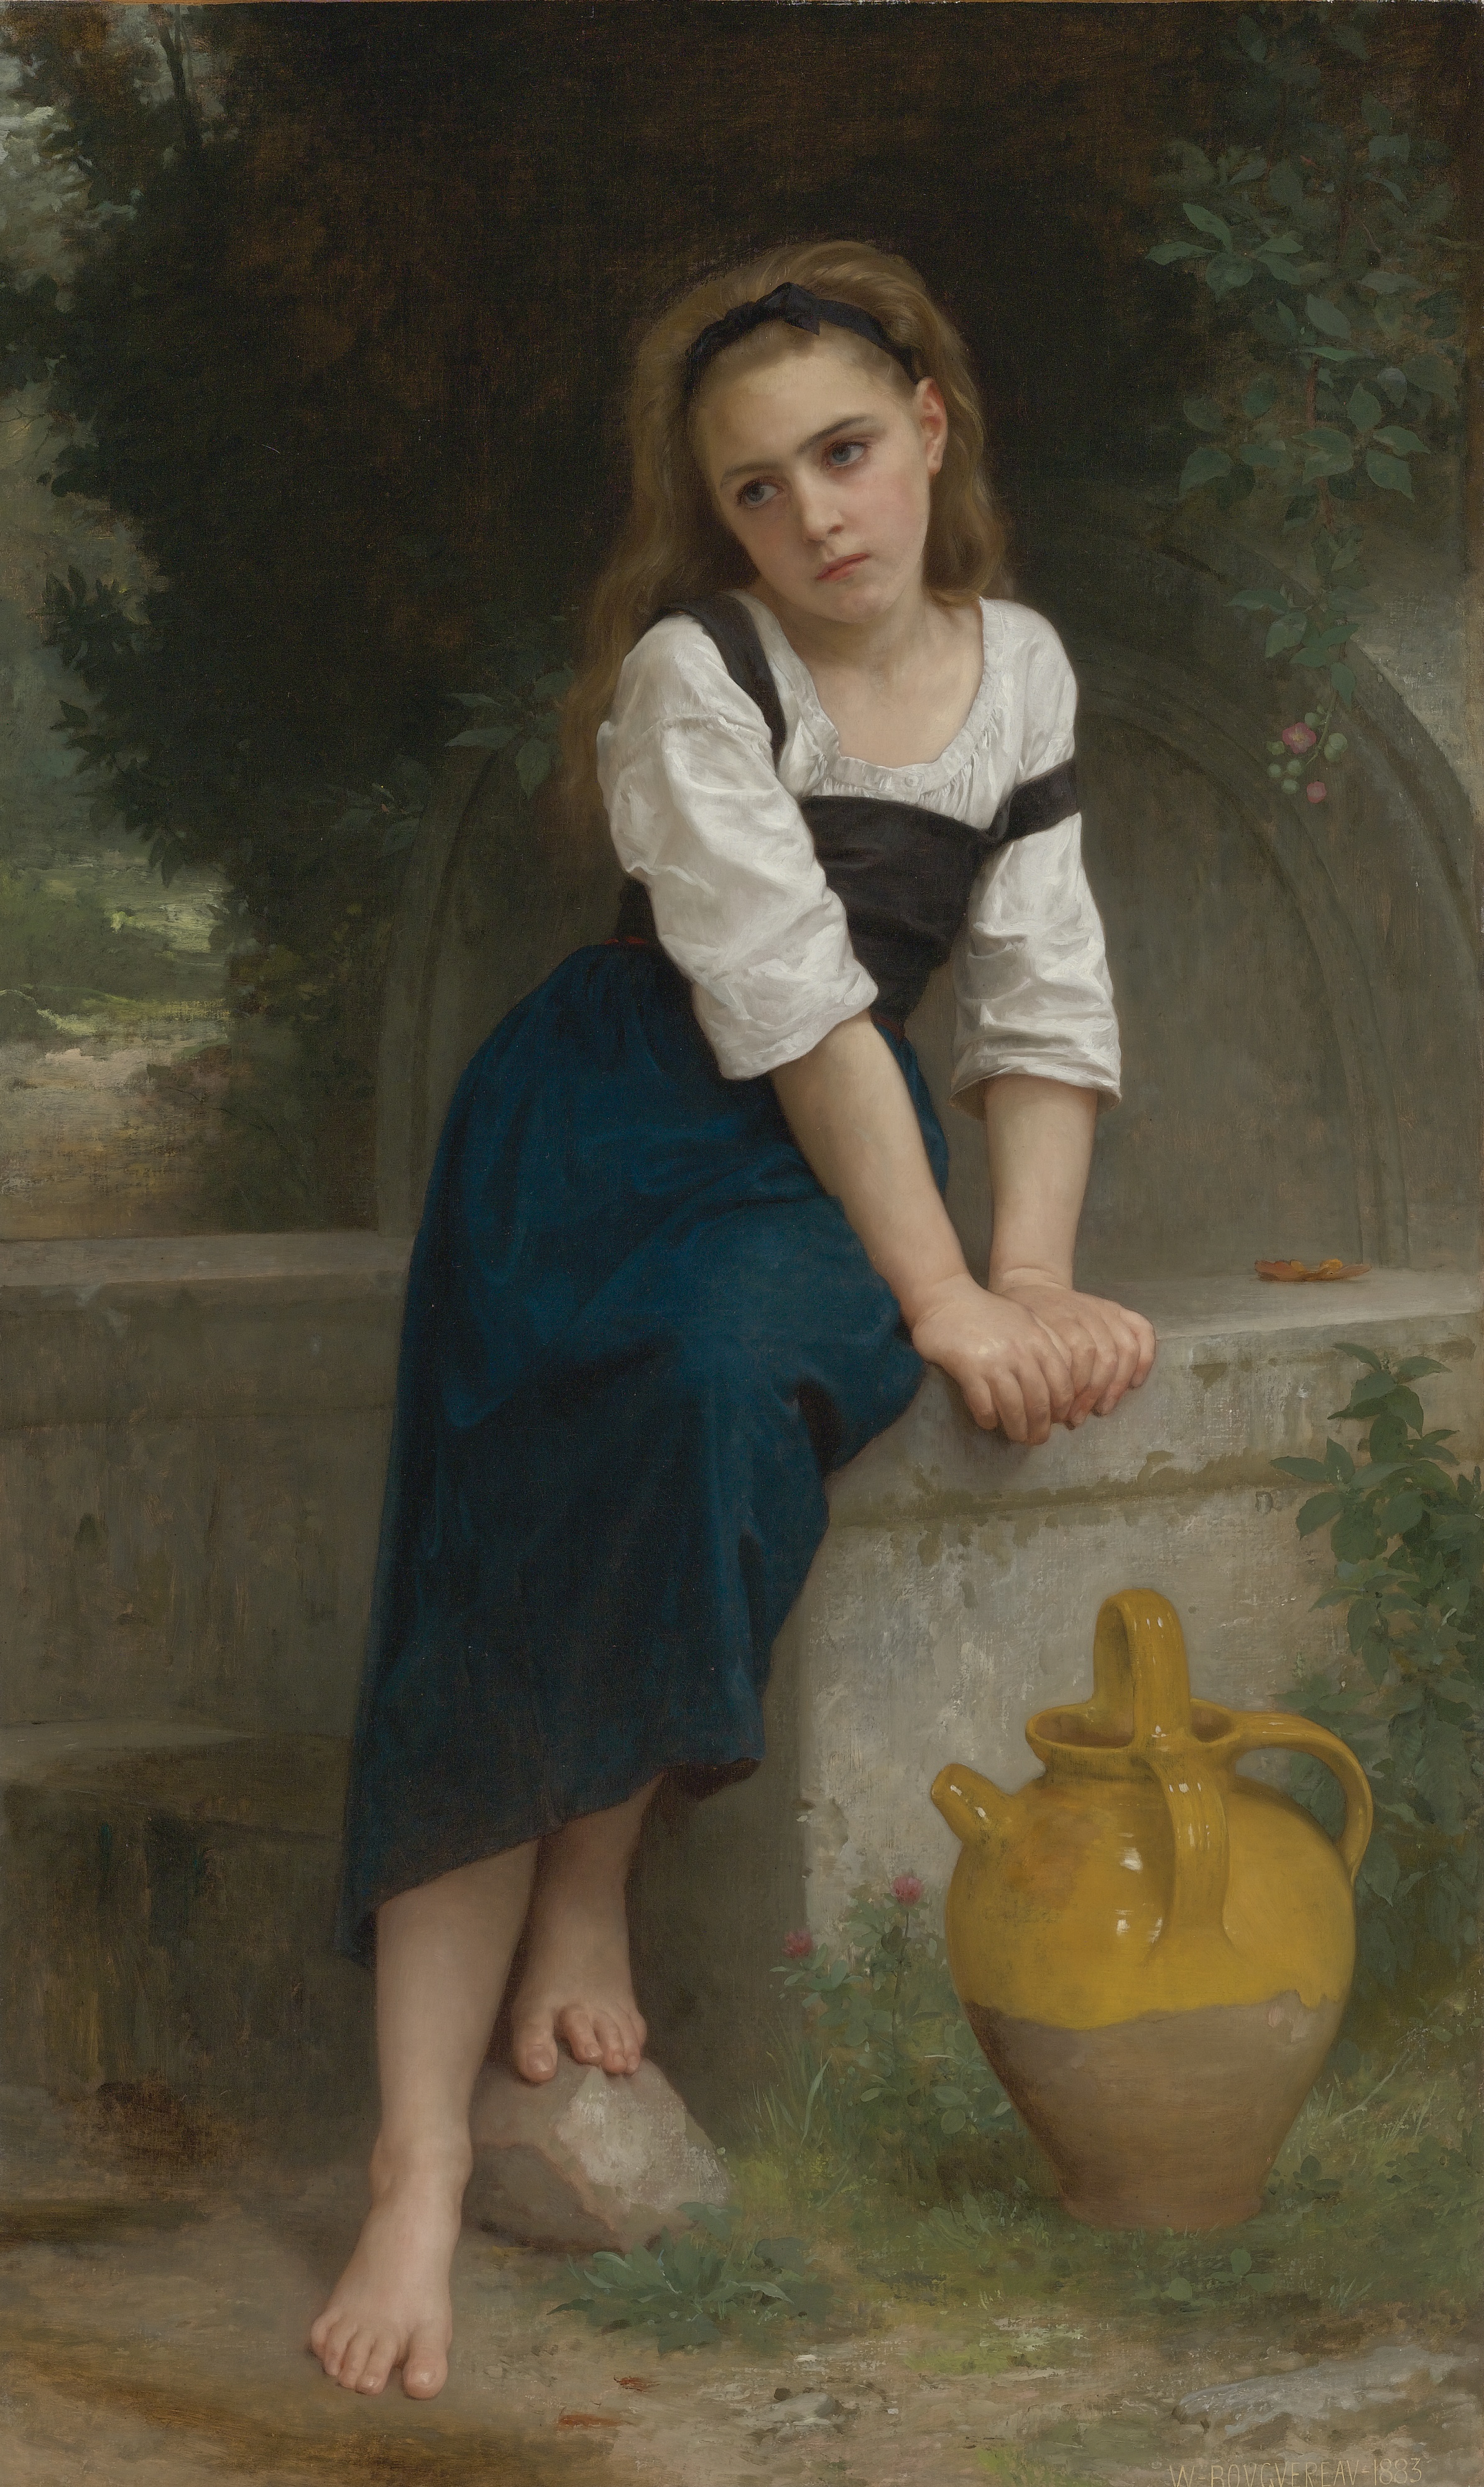 William-Adolphe Bouguereau (1825-1905) - Orphan by the Fountain (1883)